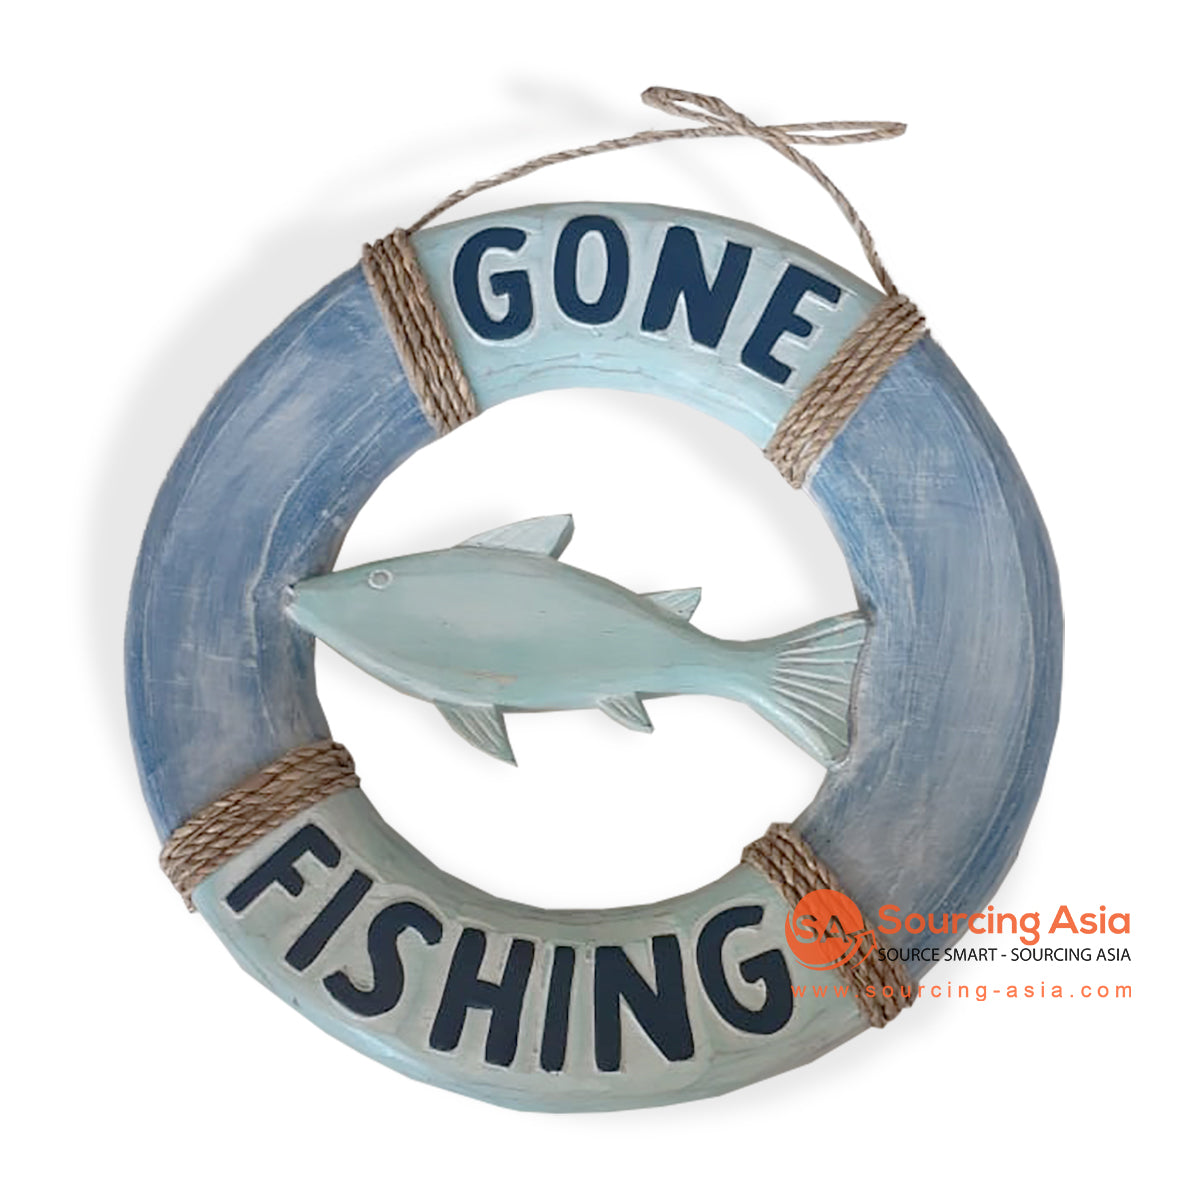 SKH008 WOODEN DECORATION SIGN "GONE FISHING" WITH FISH ORNAMENT